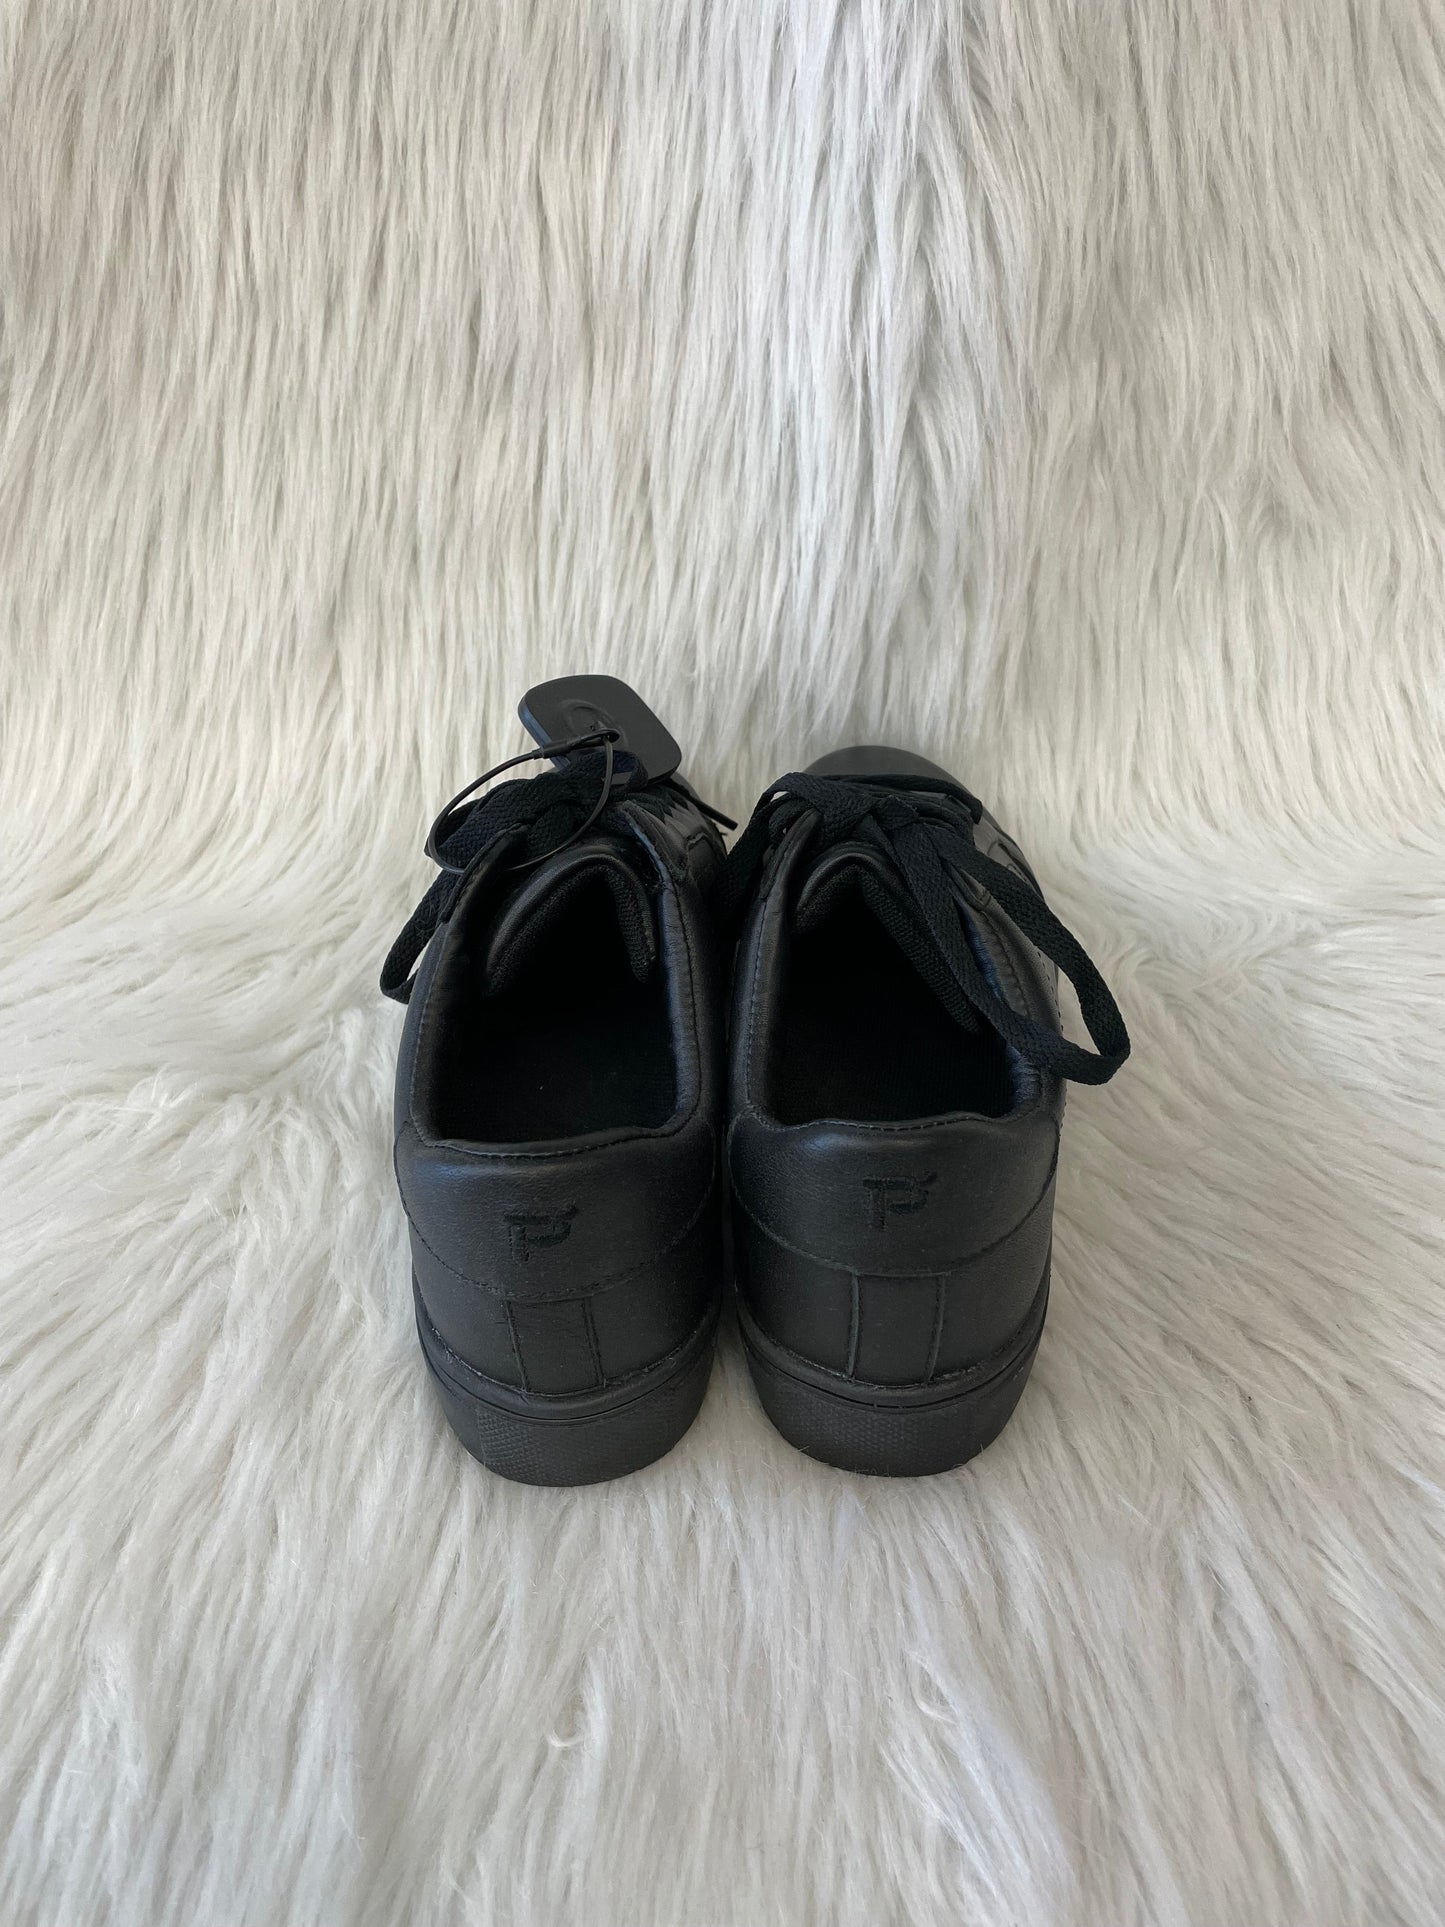 Black Shoes Sneakers Cmc, Size 6.5